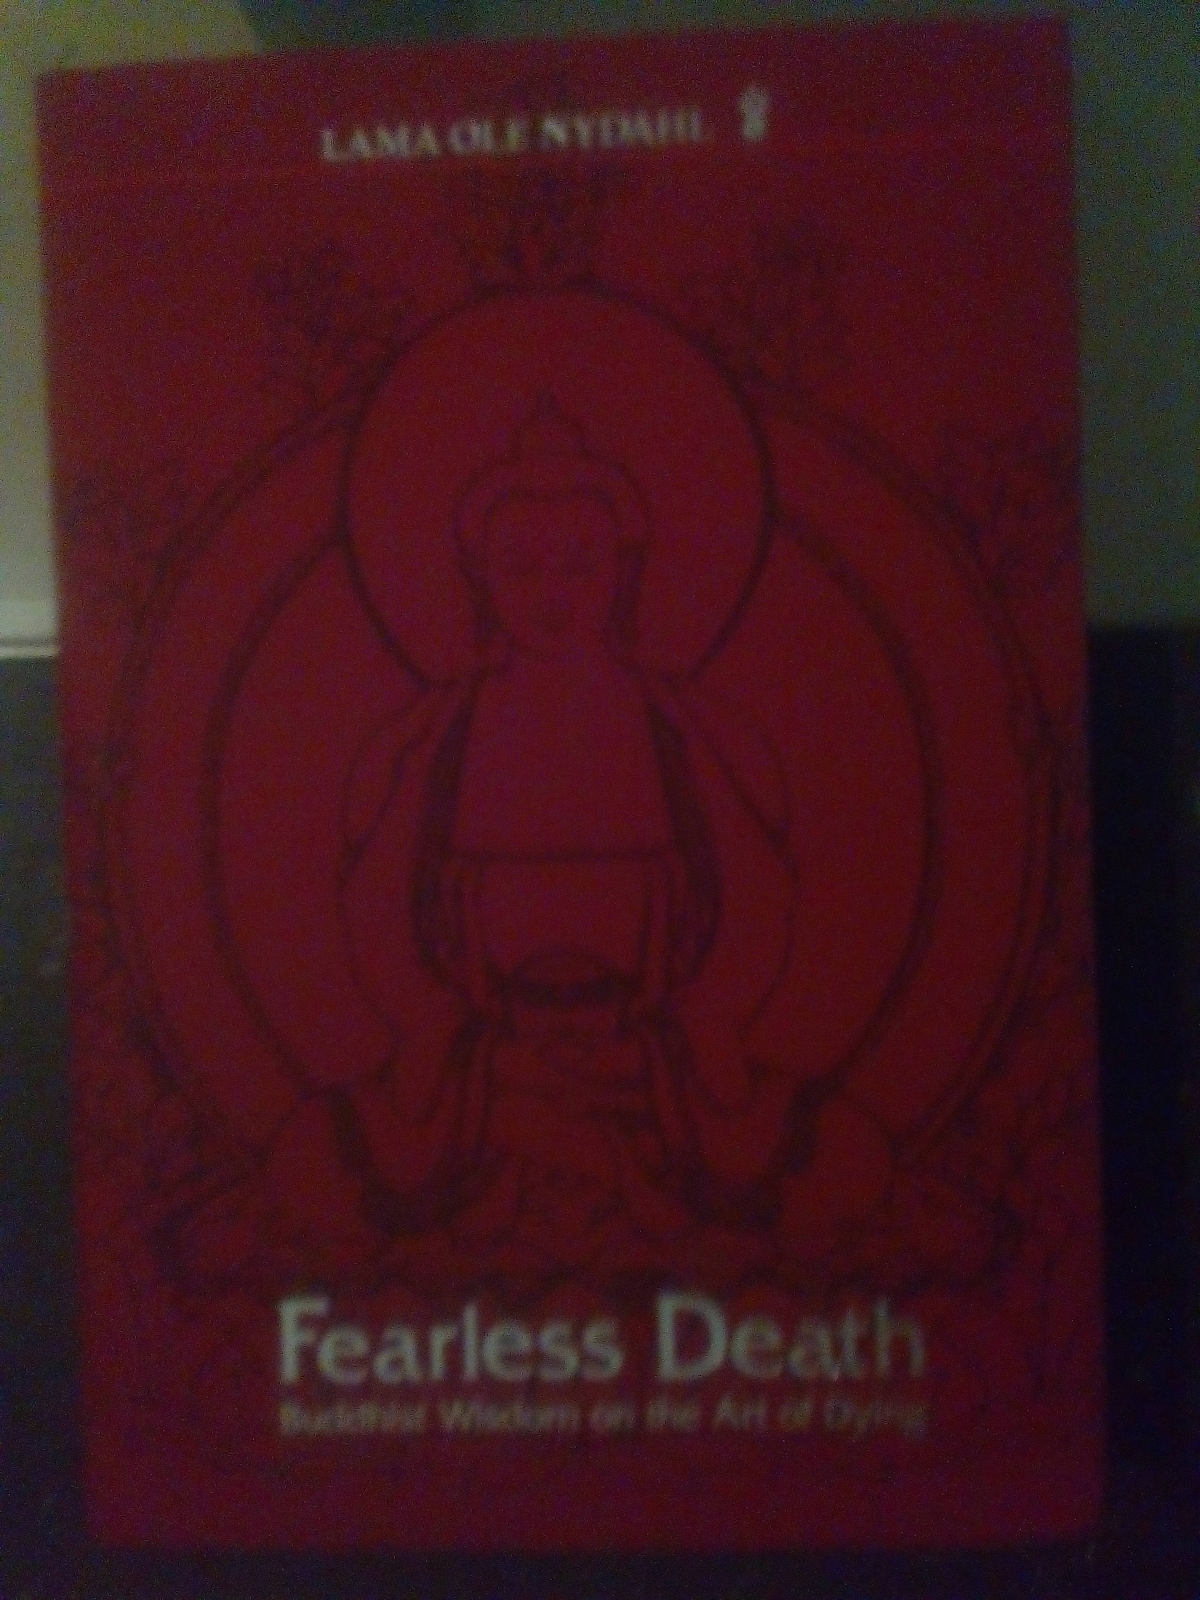 'Fearless Death' by Lama Ole Nydahl.